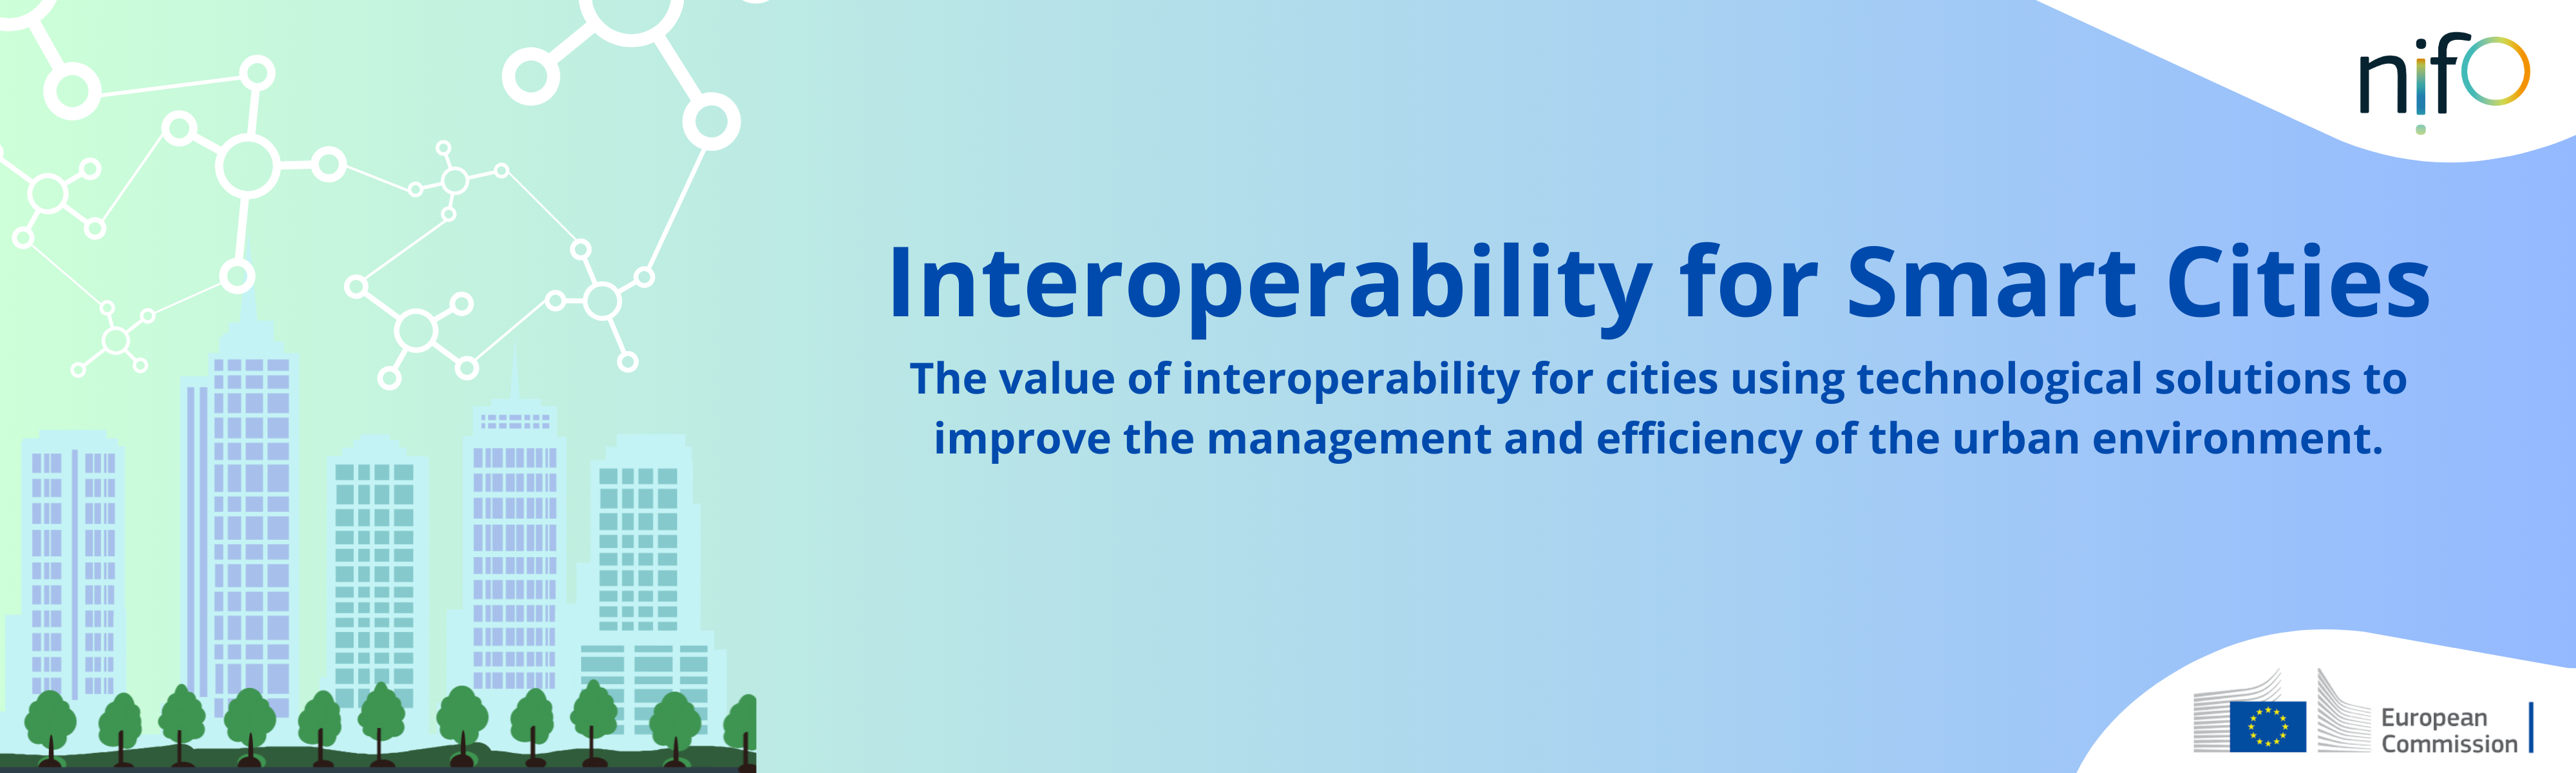 Introduction picture on Interoperability for Smart cities